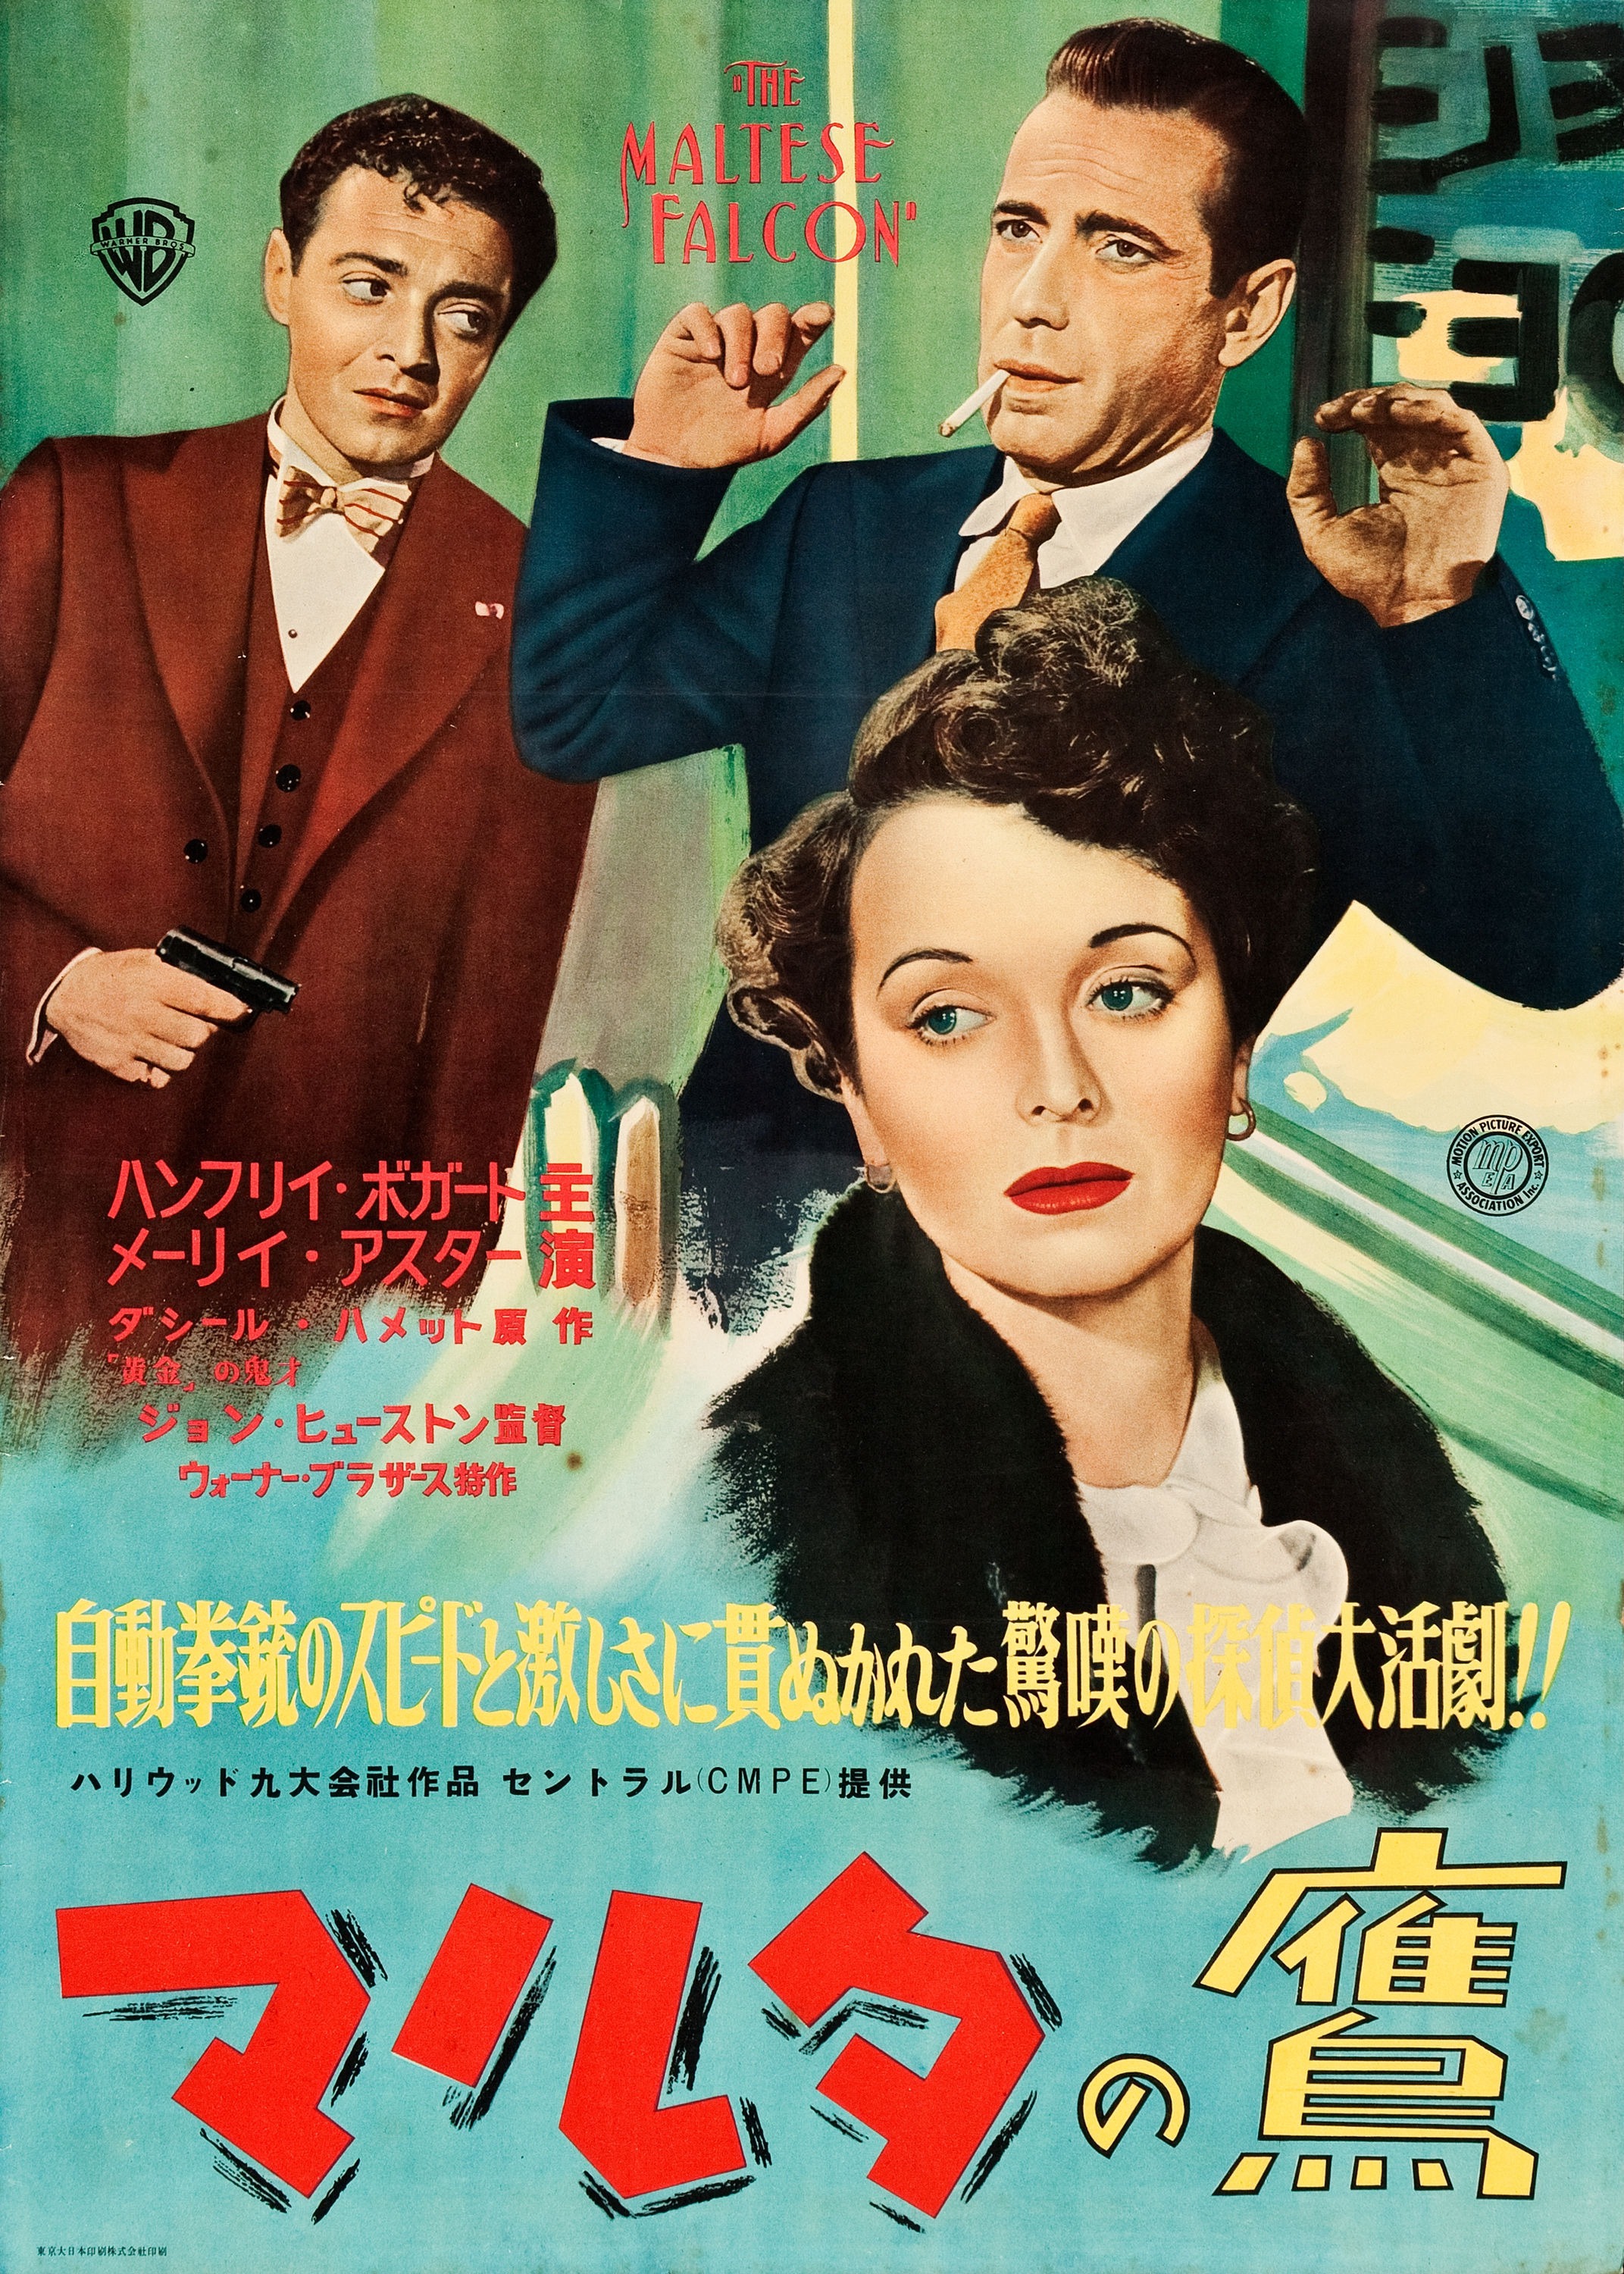 Mega Sized Movie Poster Image for The Maltese Falcon (#10 of 10)